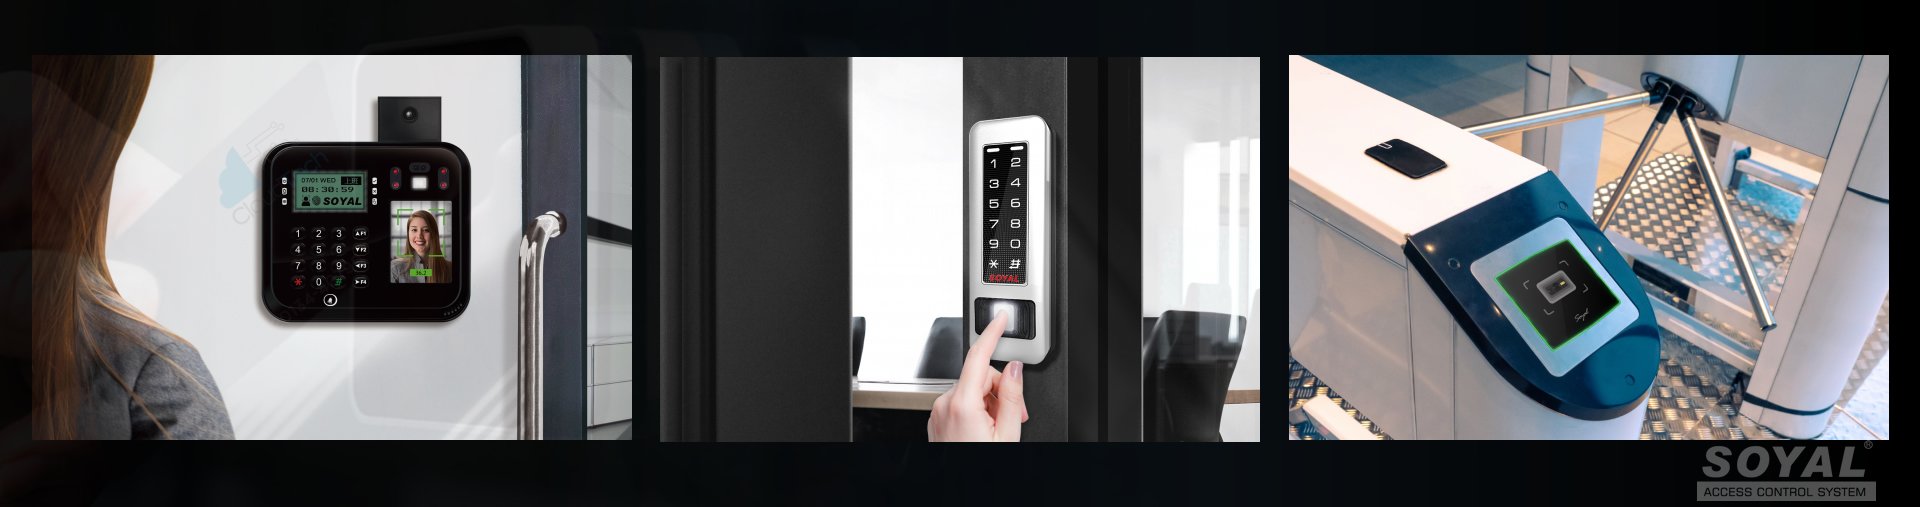 Soyal Access Controllers - Συστήματα πρόσβασης της SOYAL